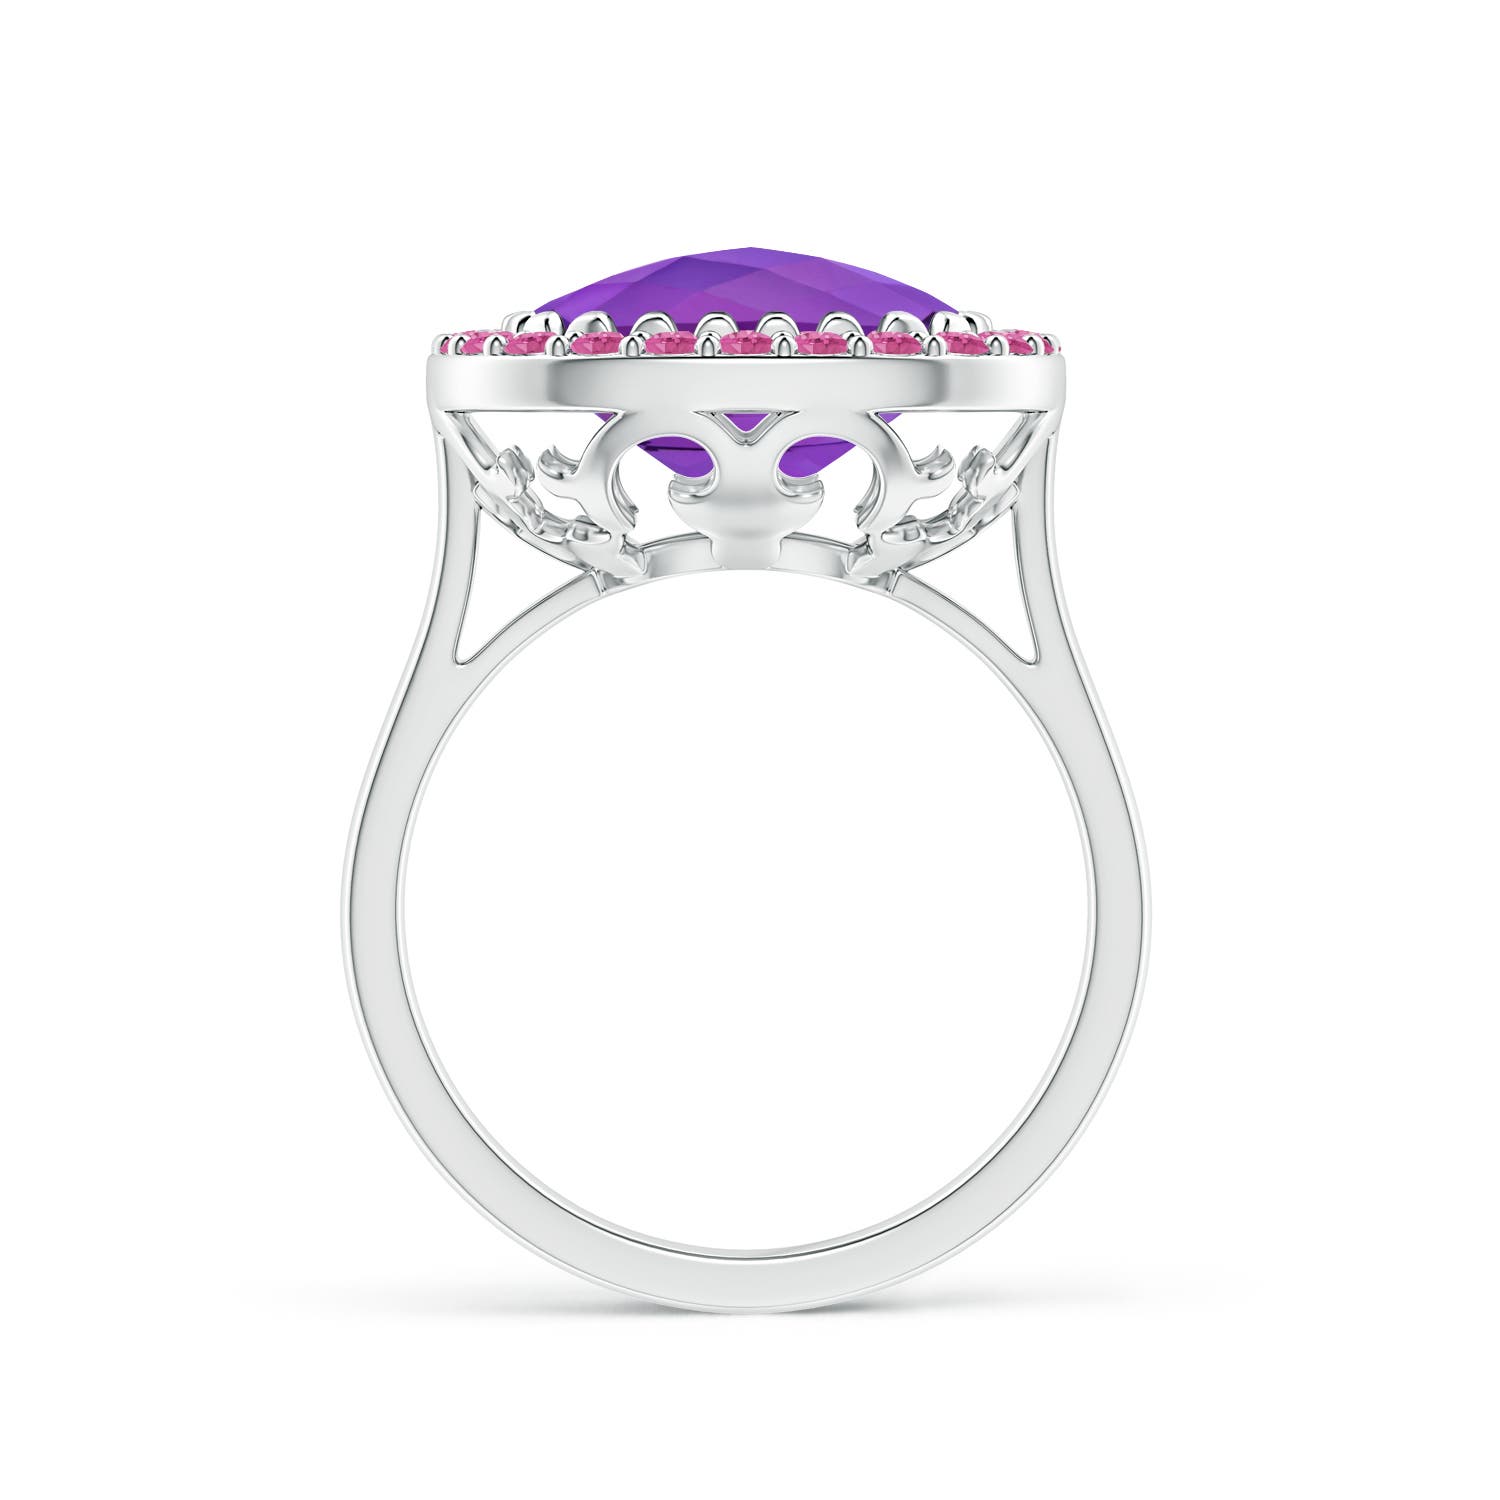 AAA - Amethyst / 5.4 CT / 14 KT White Gold